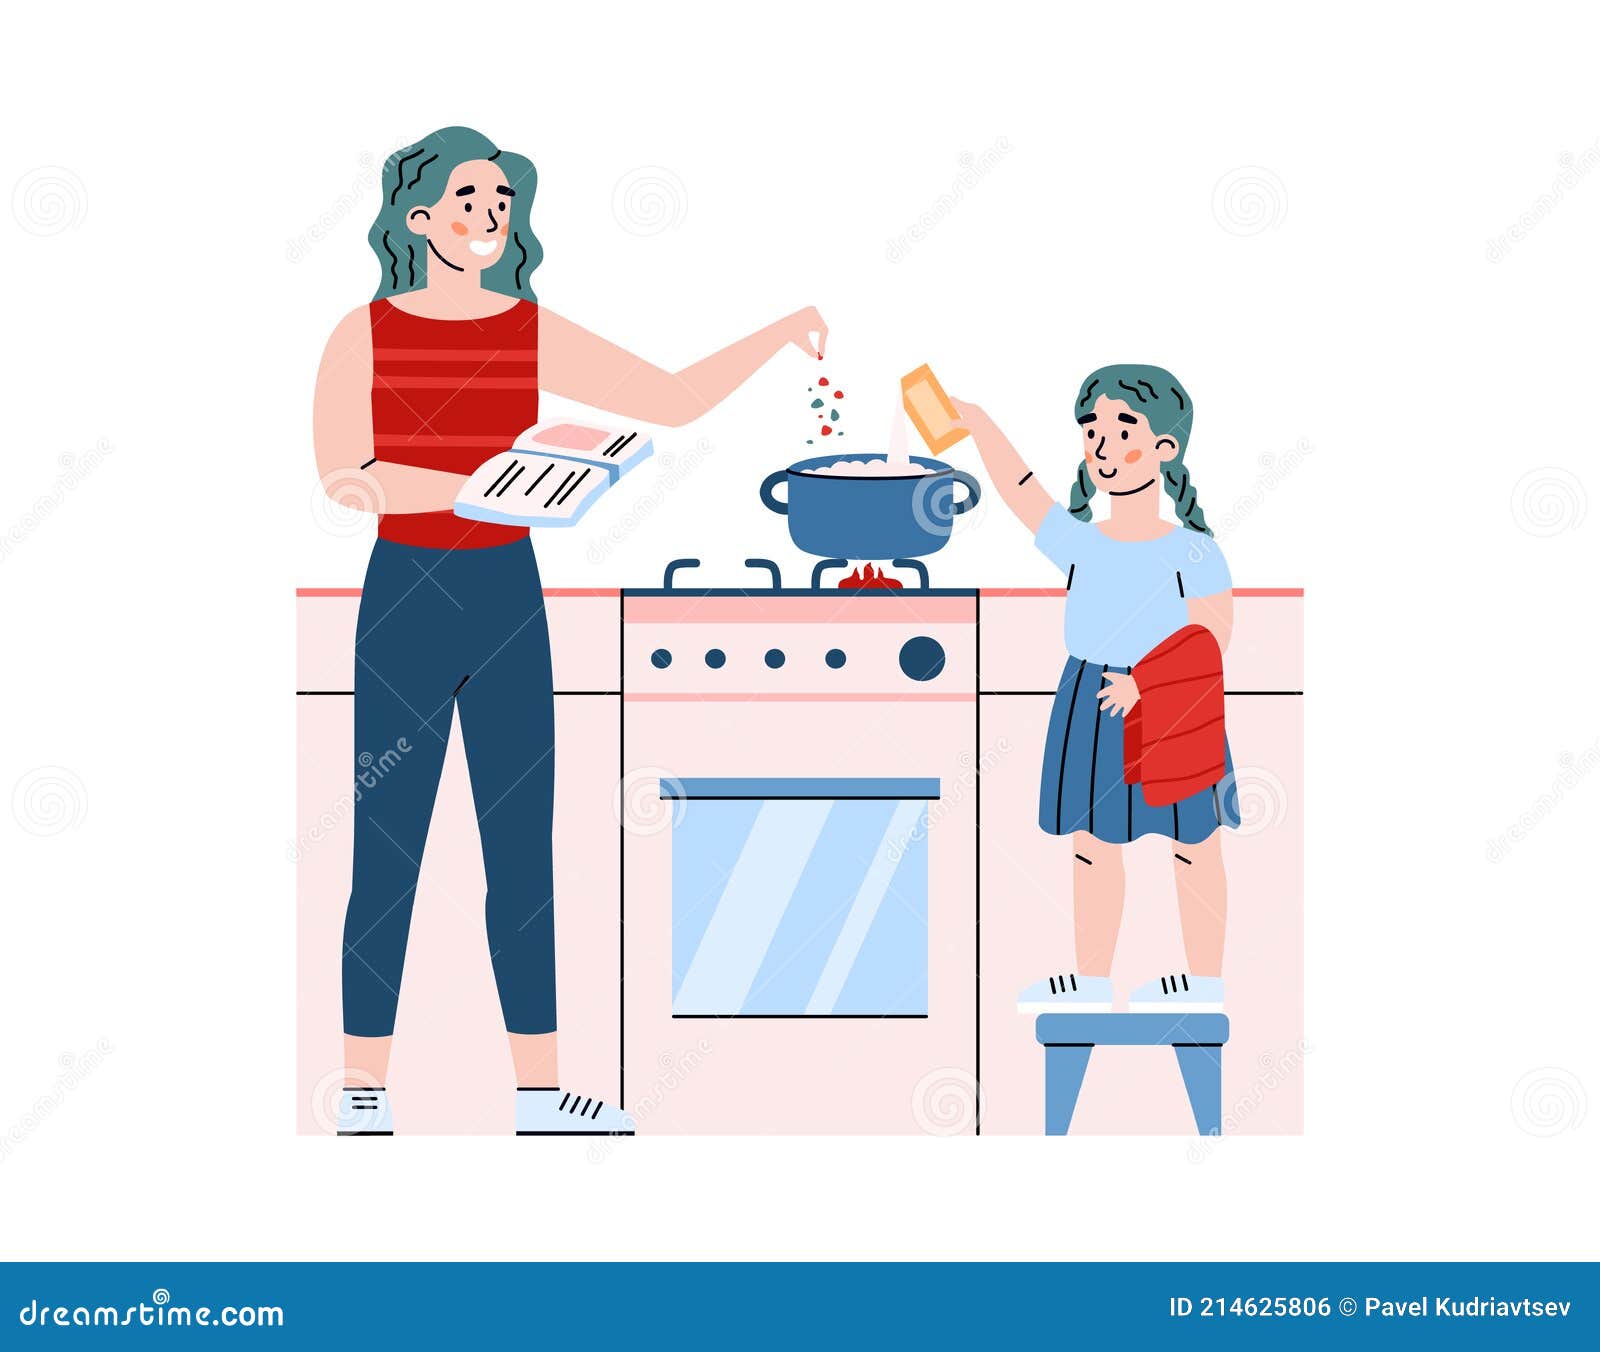 https://thumbs.dreamstime.com/z/mother-daughter-cooking-kitchen-cartoon-vector-illustration-isolated-food-white-background-girl-helping-her-214625806.jpg